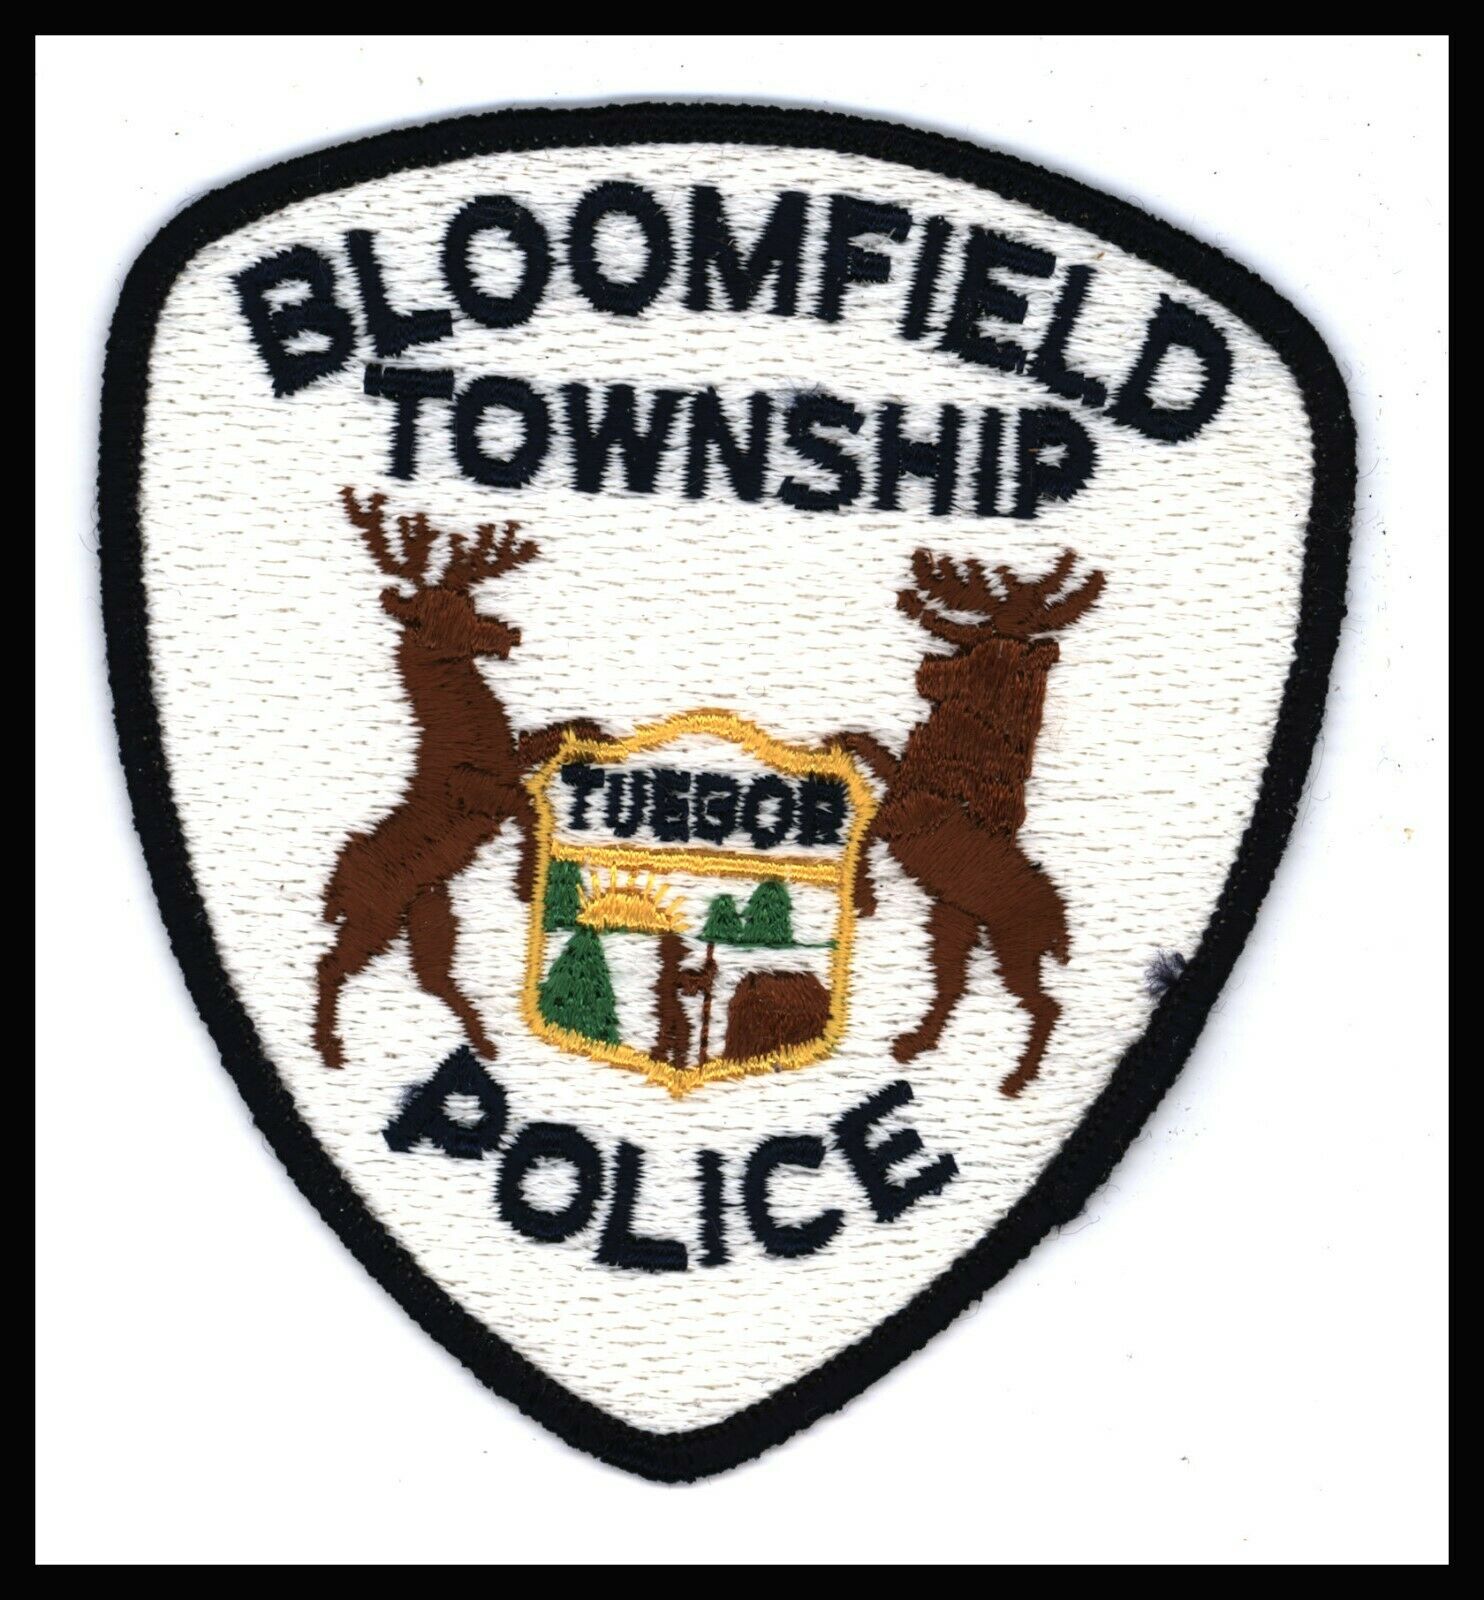 Bloomfield Township Michigan Police 4" X 4.25" Embroidered Patch